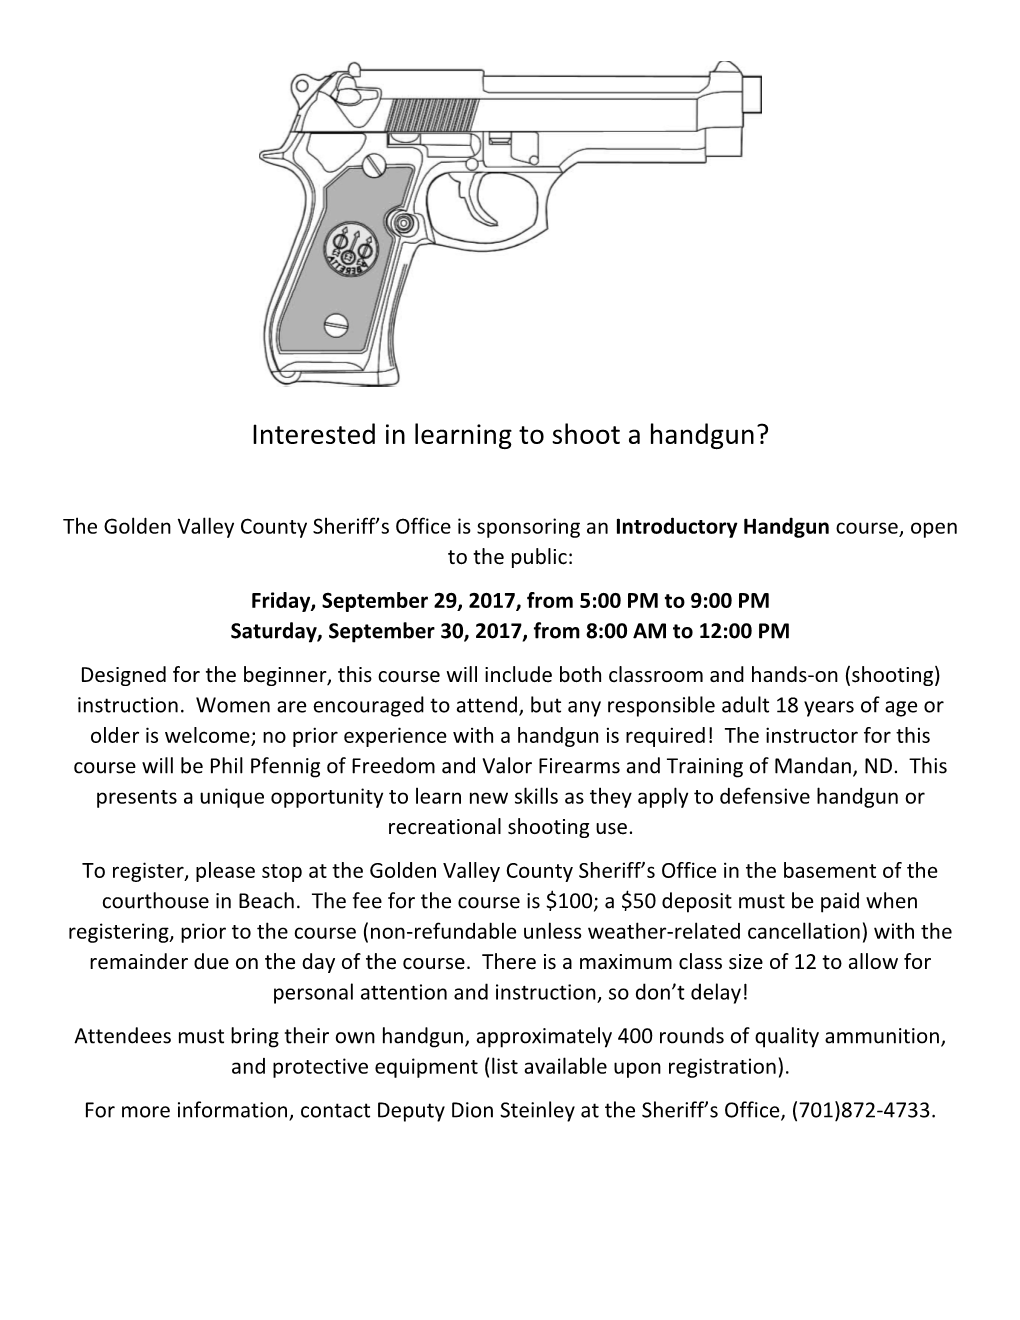 Interested in Learning to Shoot a Handgun?